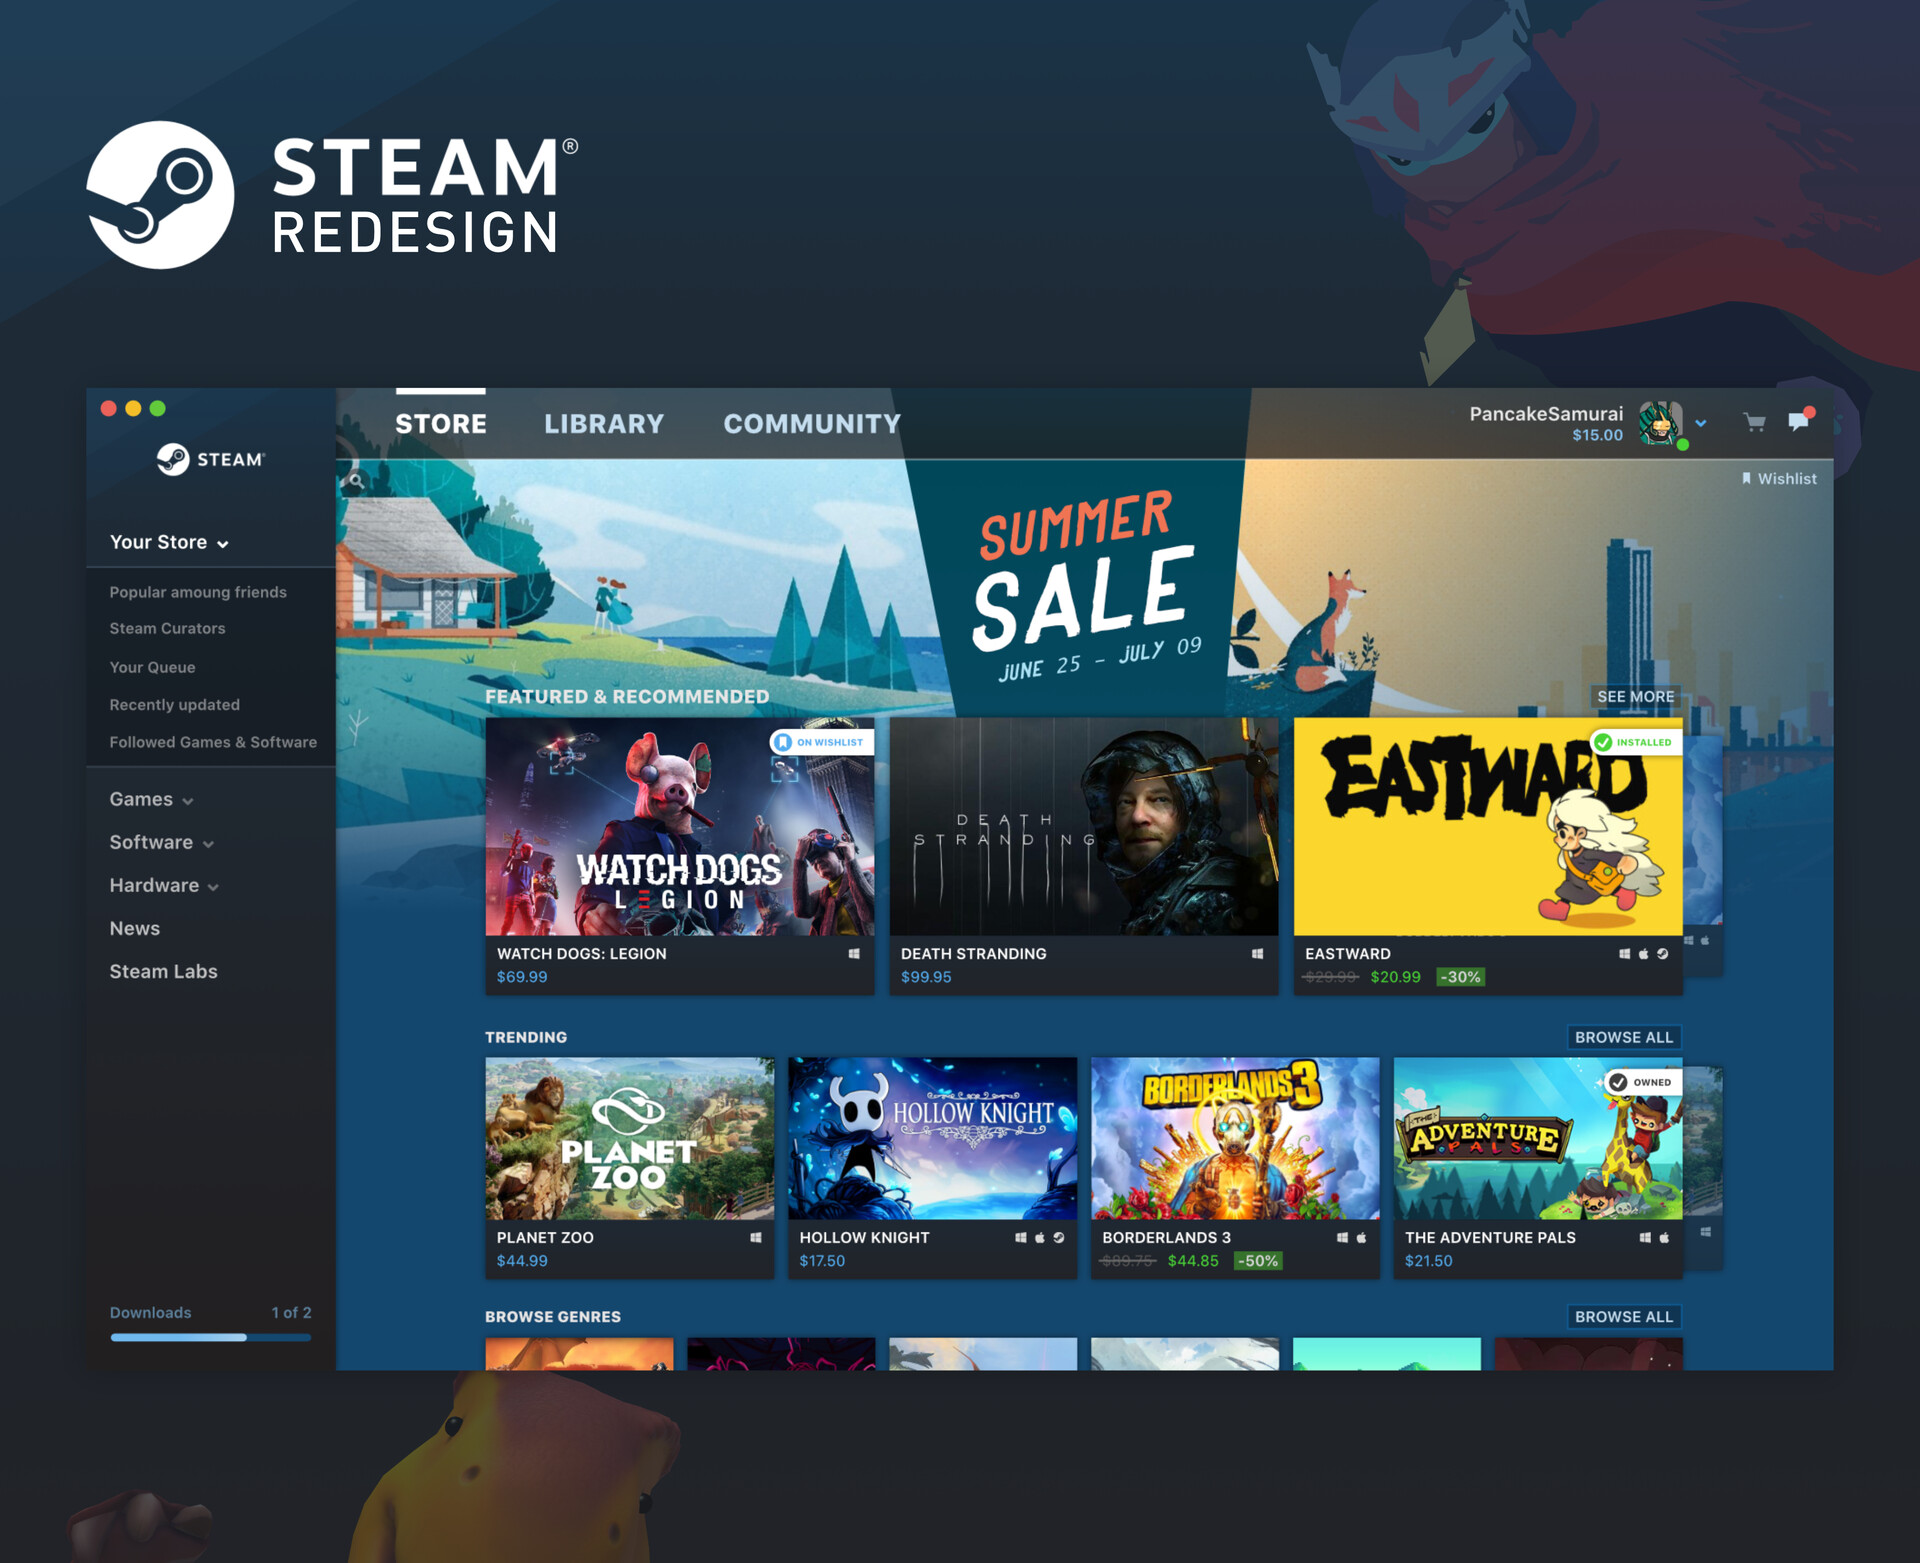 Steam Store Page Redesign (1/2) by Seb Jachec on Dribbble